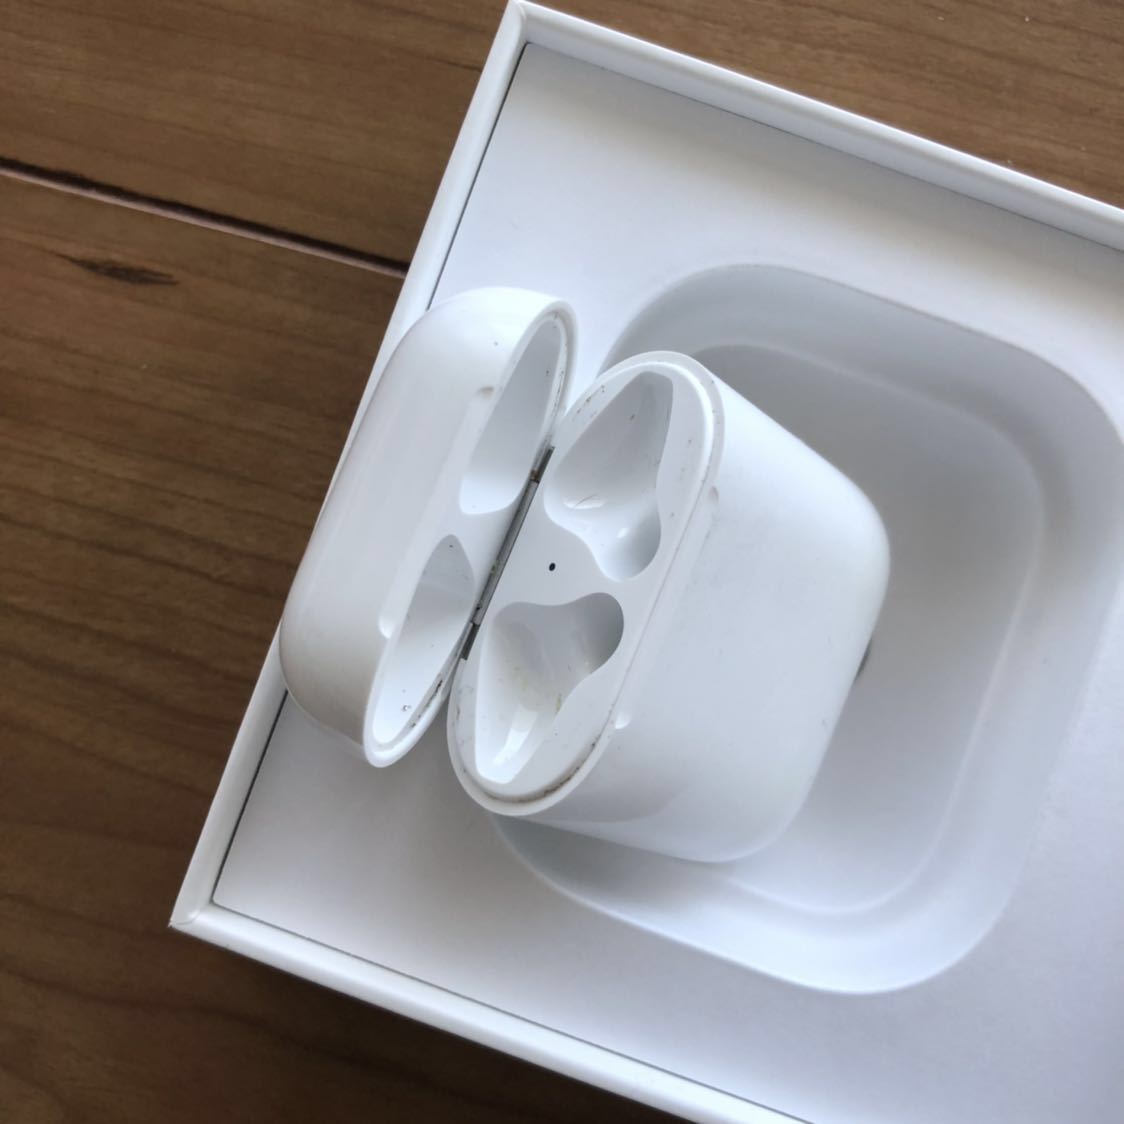 Apple AirPods 原文:Apple AirPods